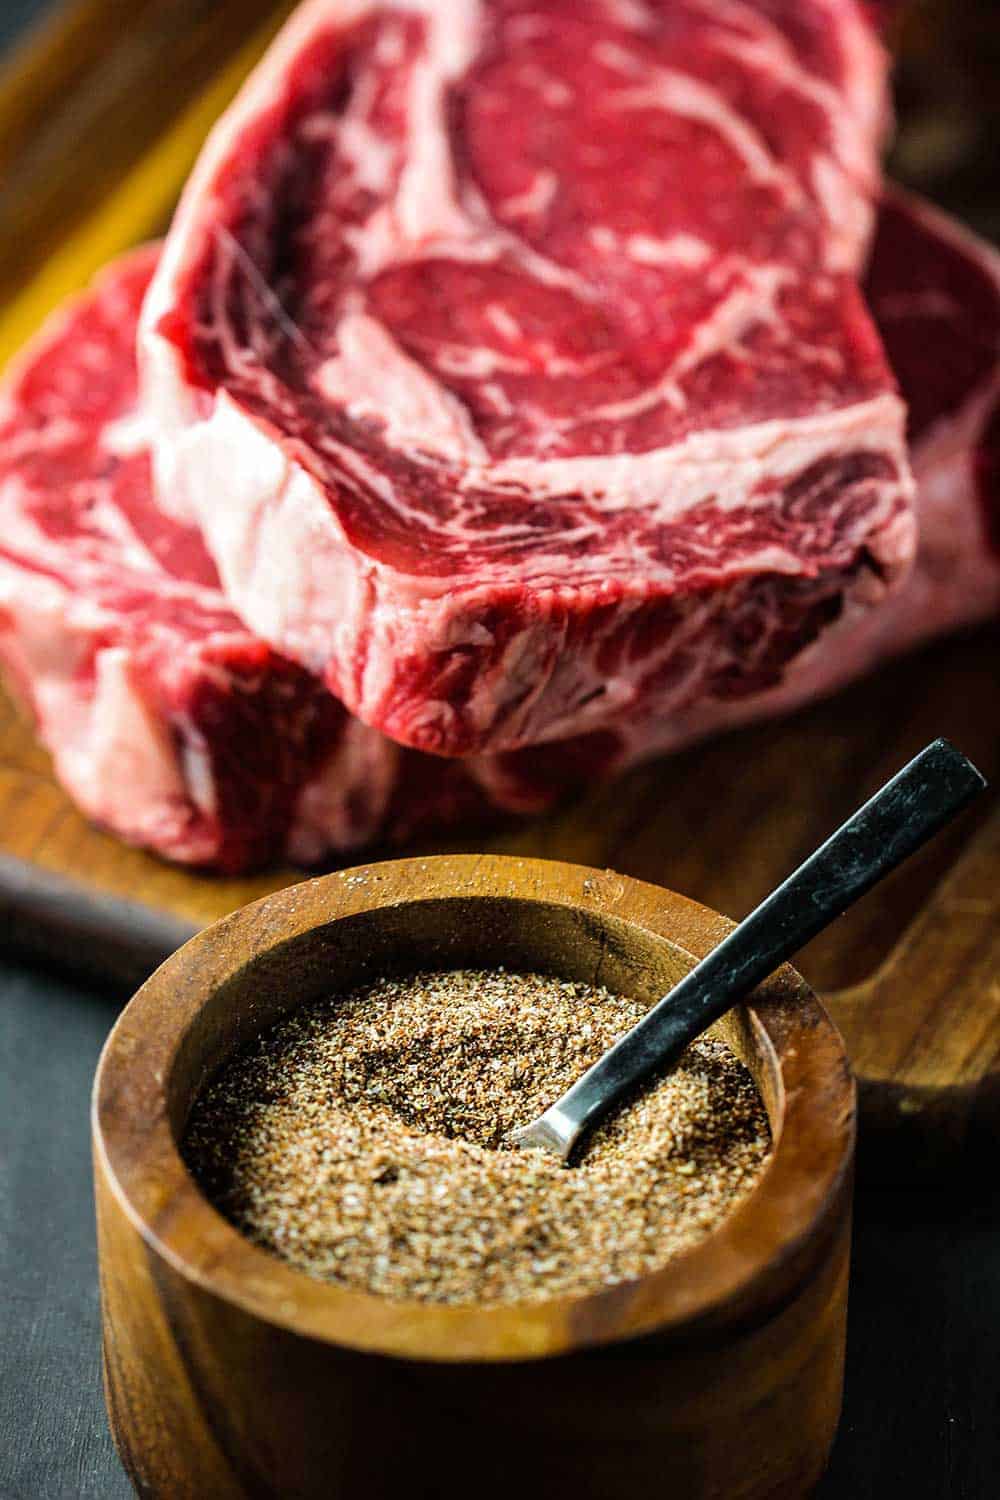 Two large boneless ribeye steaks on a cutting board next to a wooden bowl of spices.